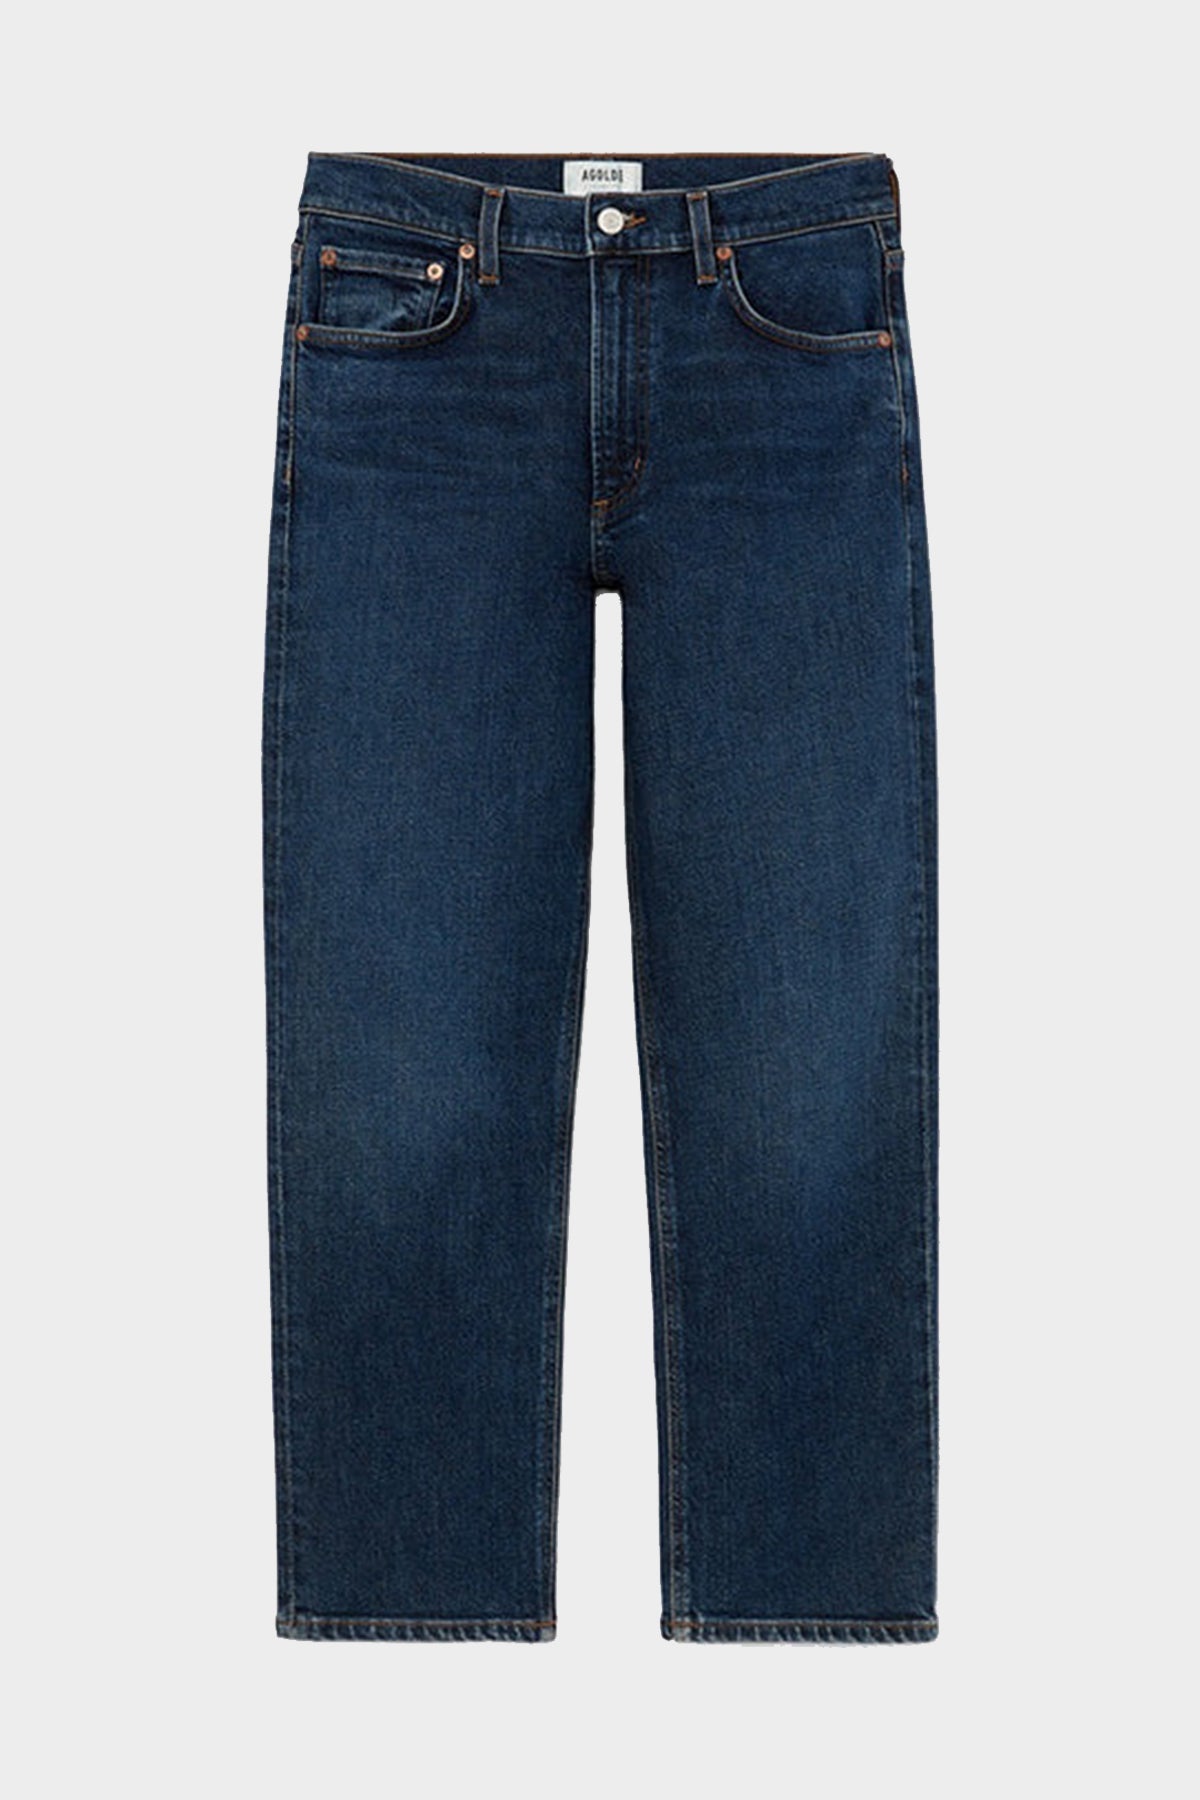 Kye Mid-Rise Straight Crop Jean in Song - shop-olivia.com